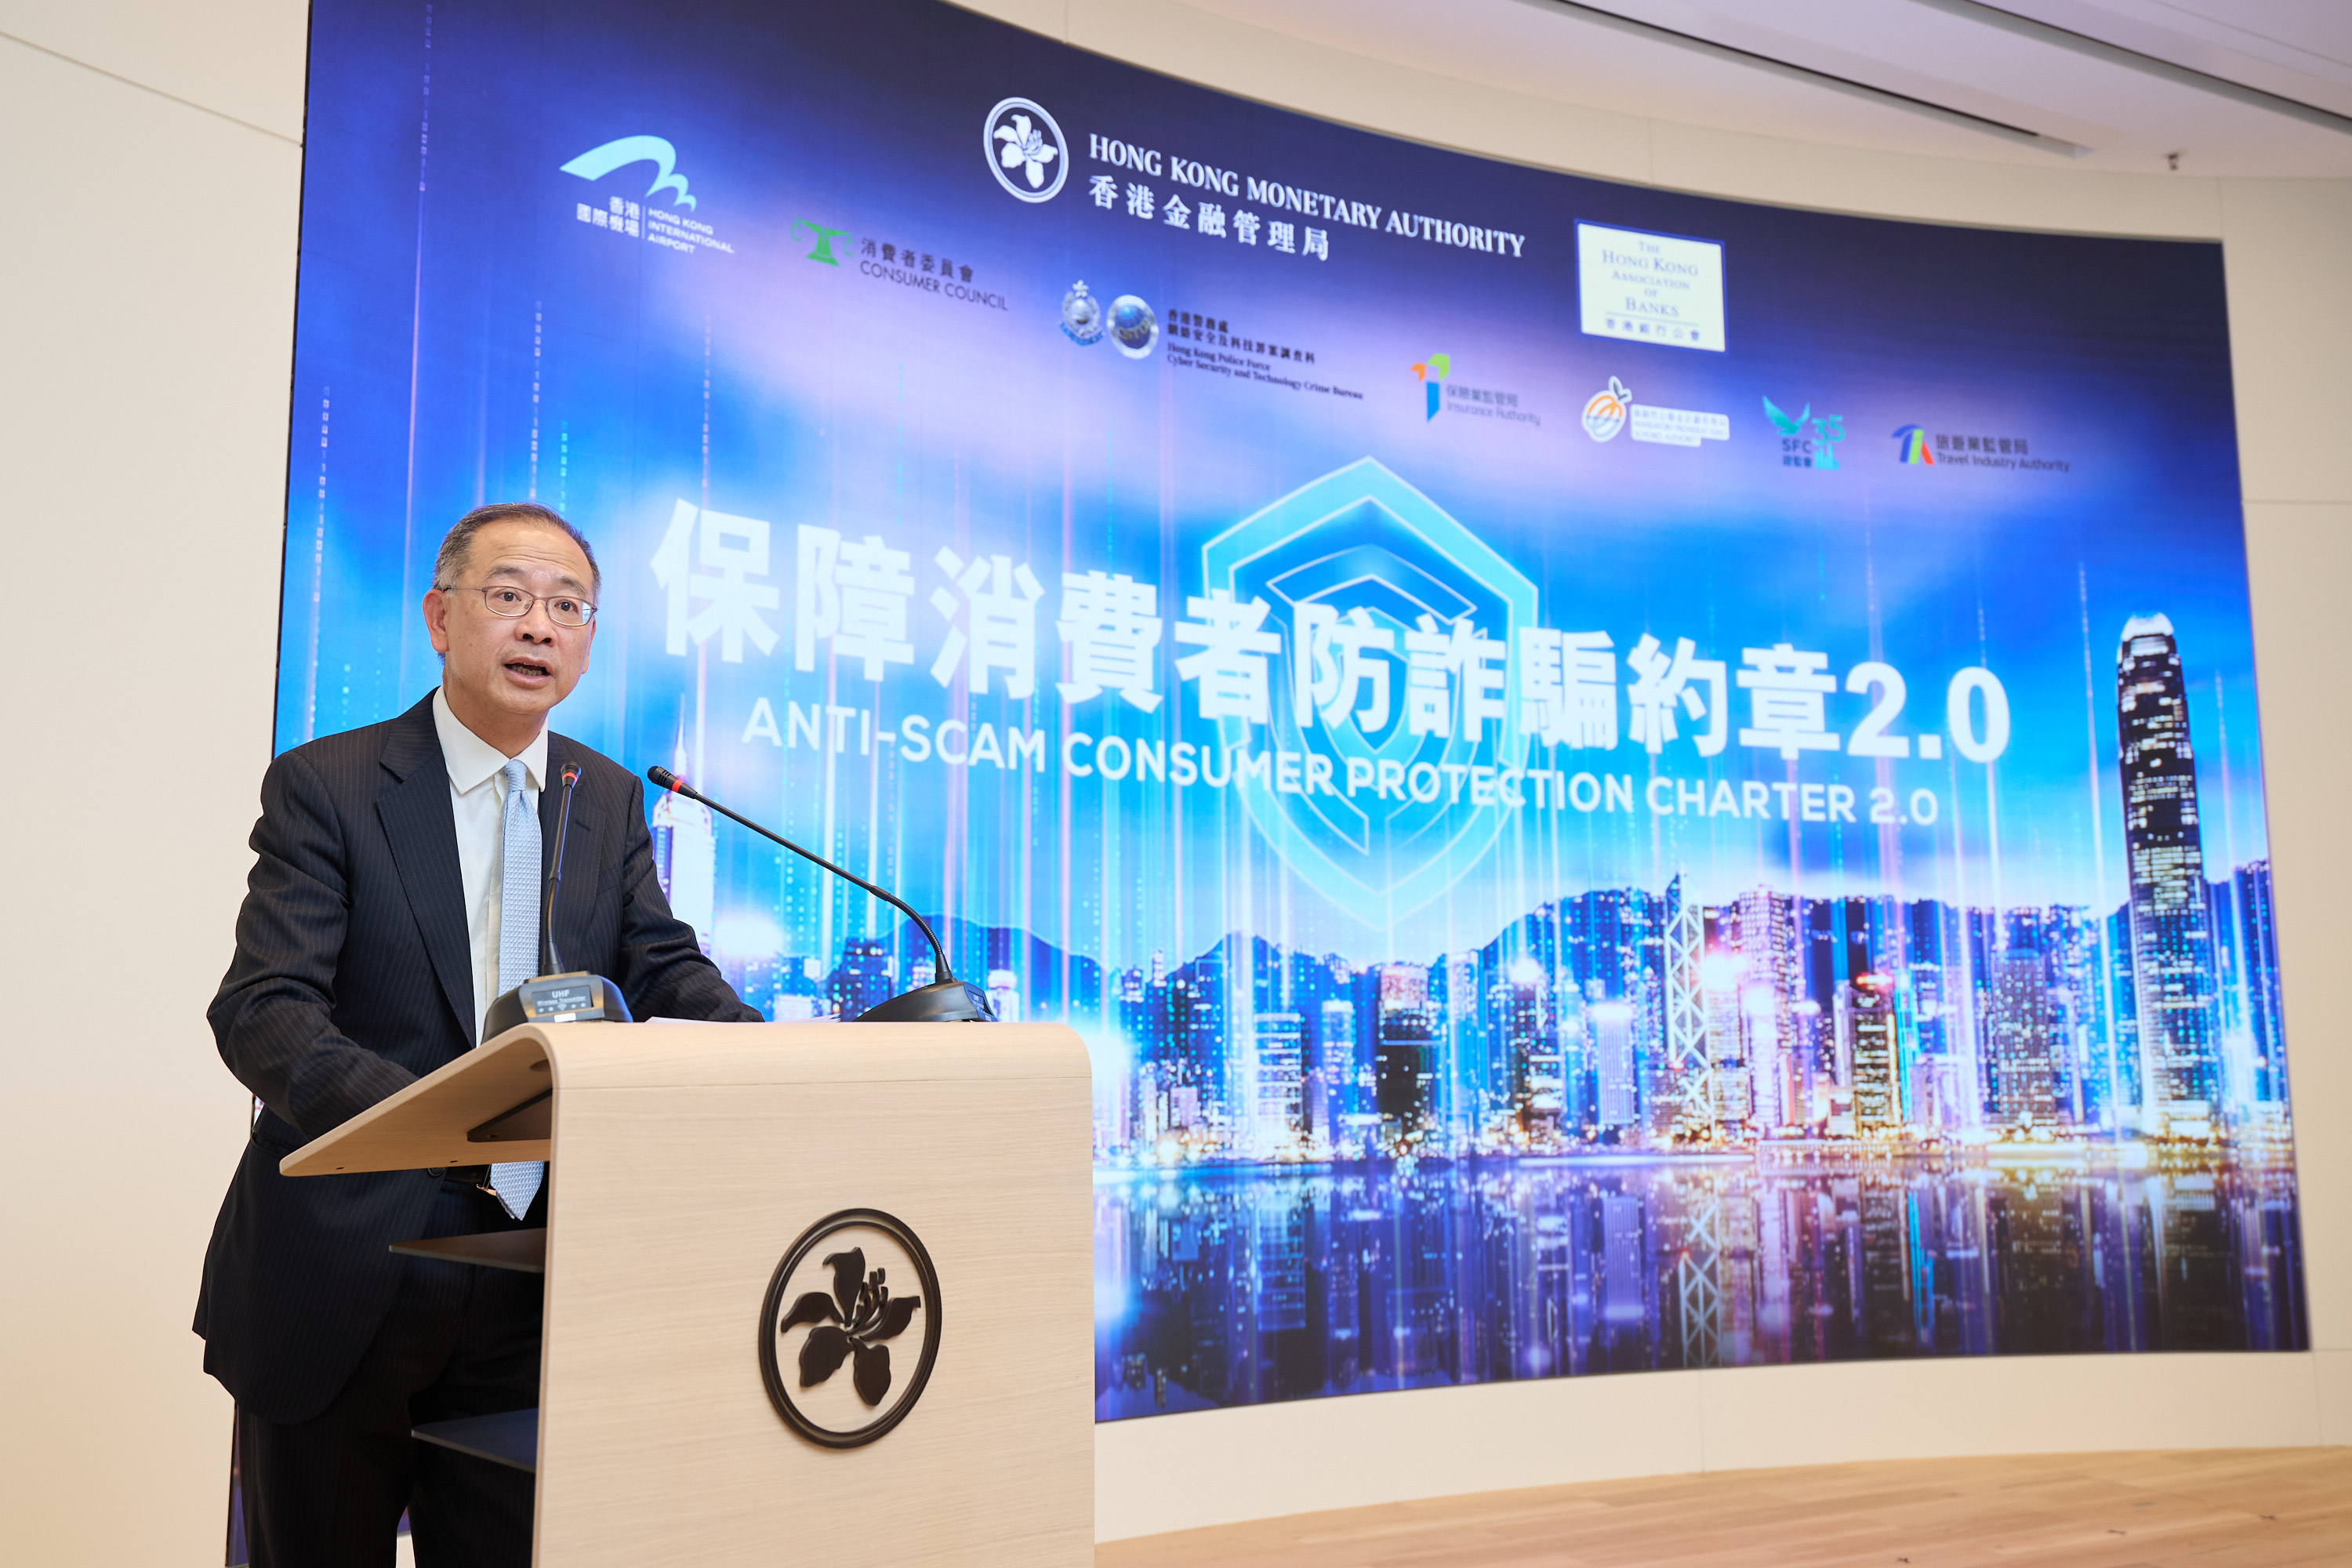 Mr Eddie Yue, Chief Executive of the Hong Kong Monetary Authority, gives opening remarks at the Anti-Scam Consumer Protection Charter 2.0 event, announcing that the coverage of the Charter is expanded to include more institutions and merchants.